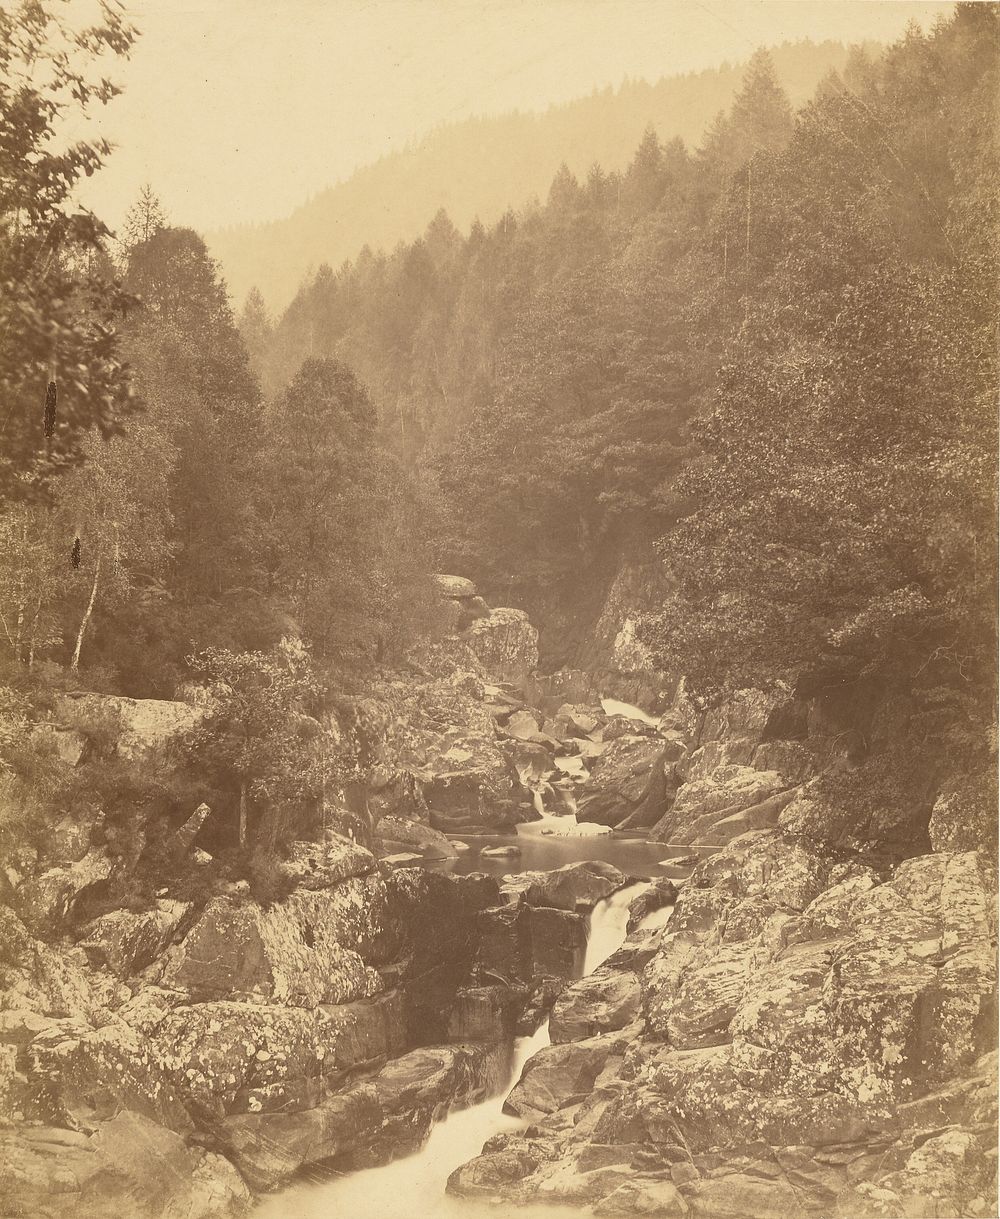 On the Llugury, below the Swallow Falls. by Roger Fenton